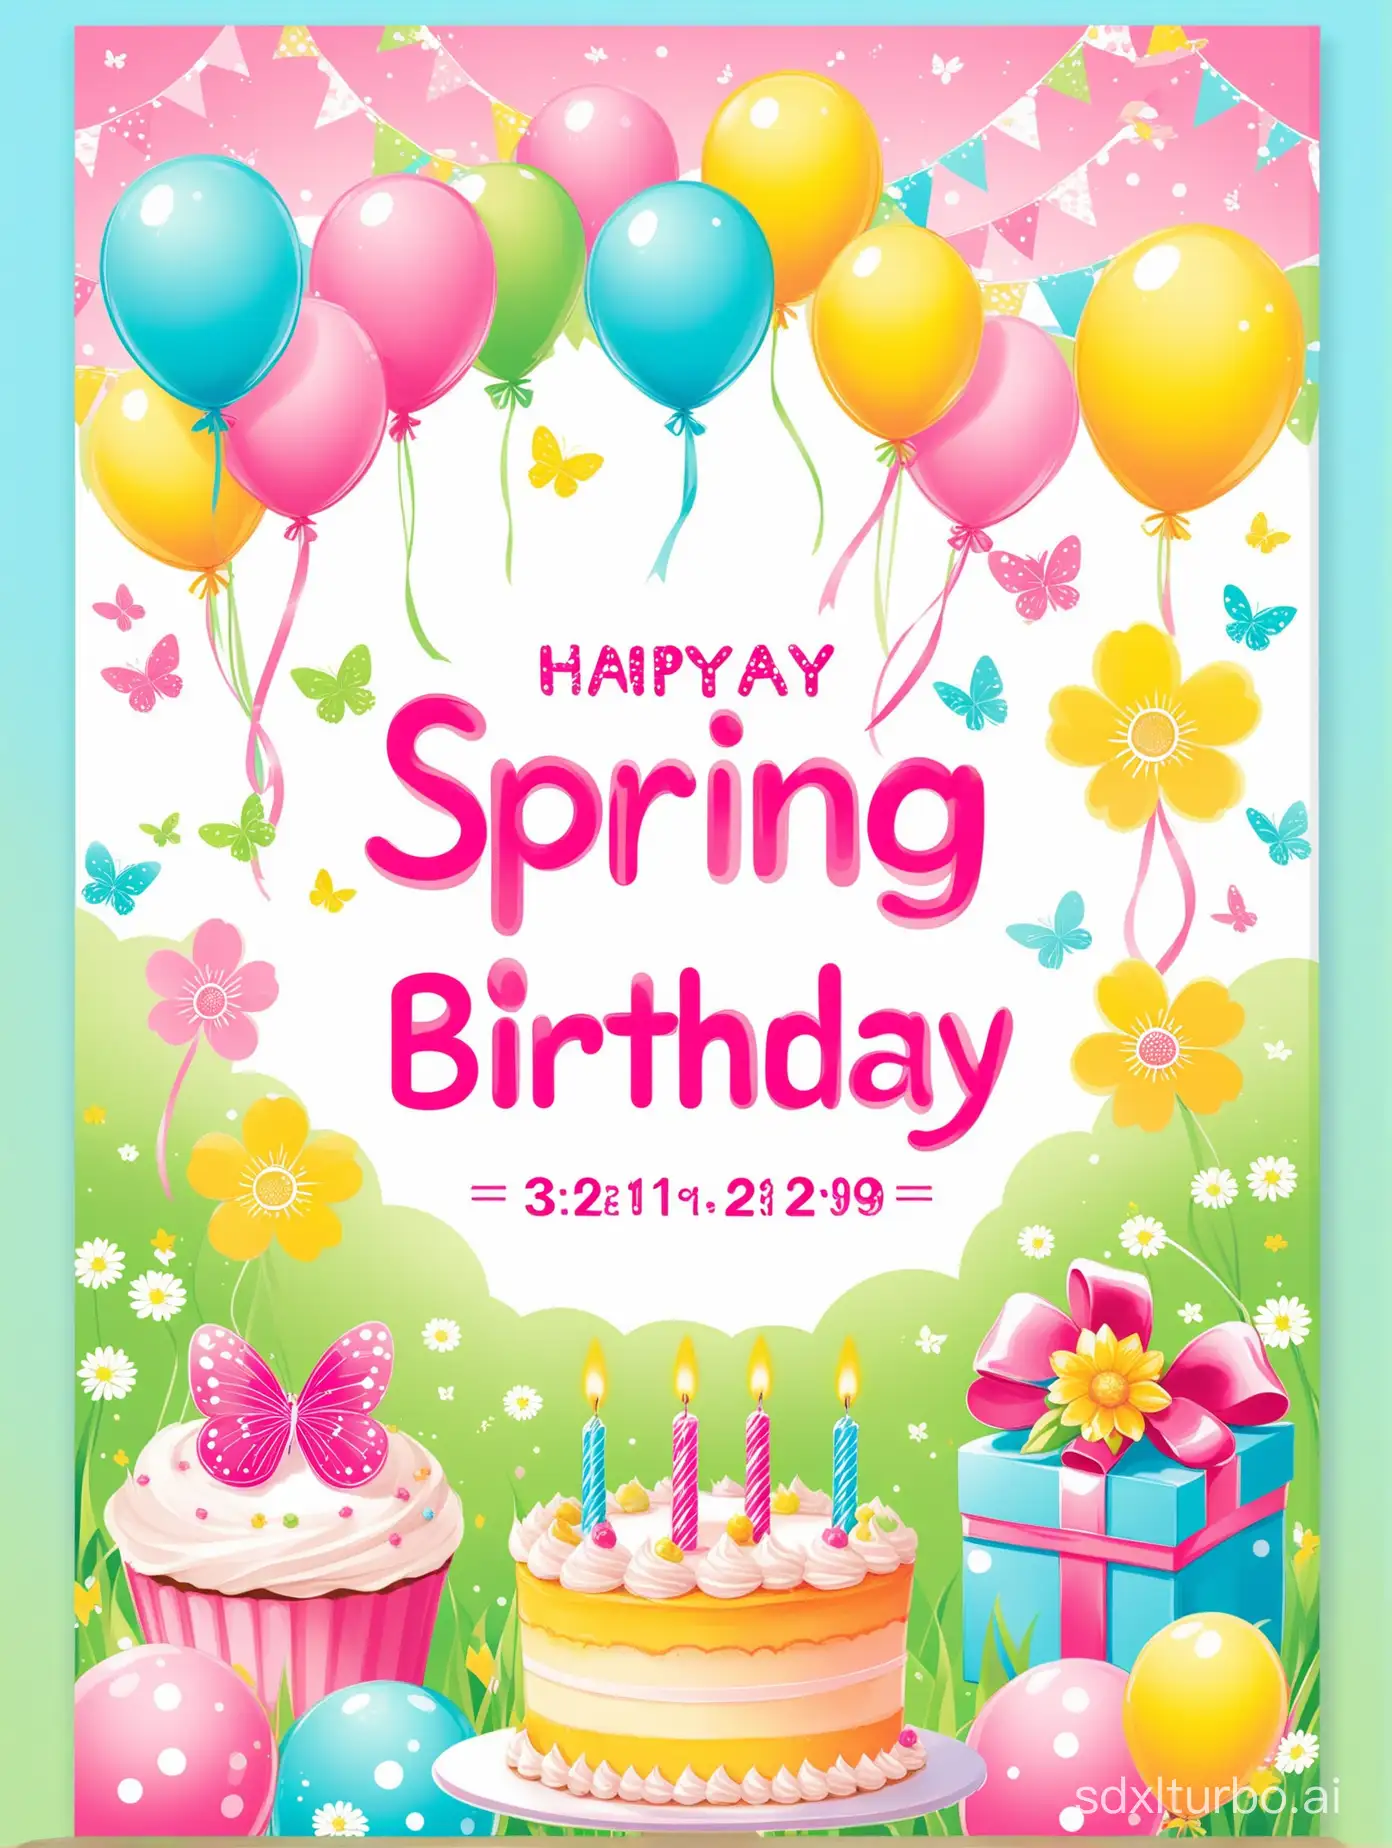 Spring-themed birthday party poster